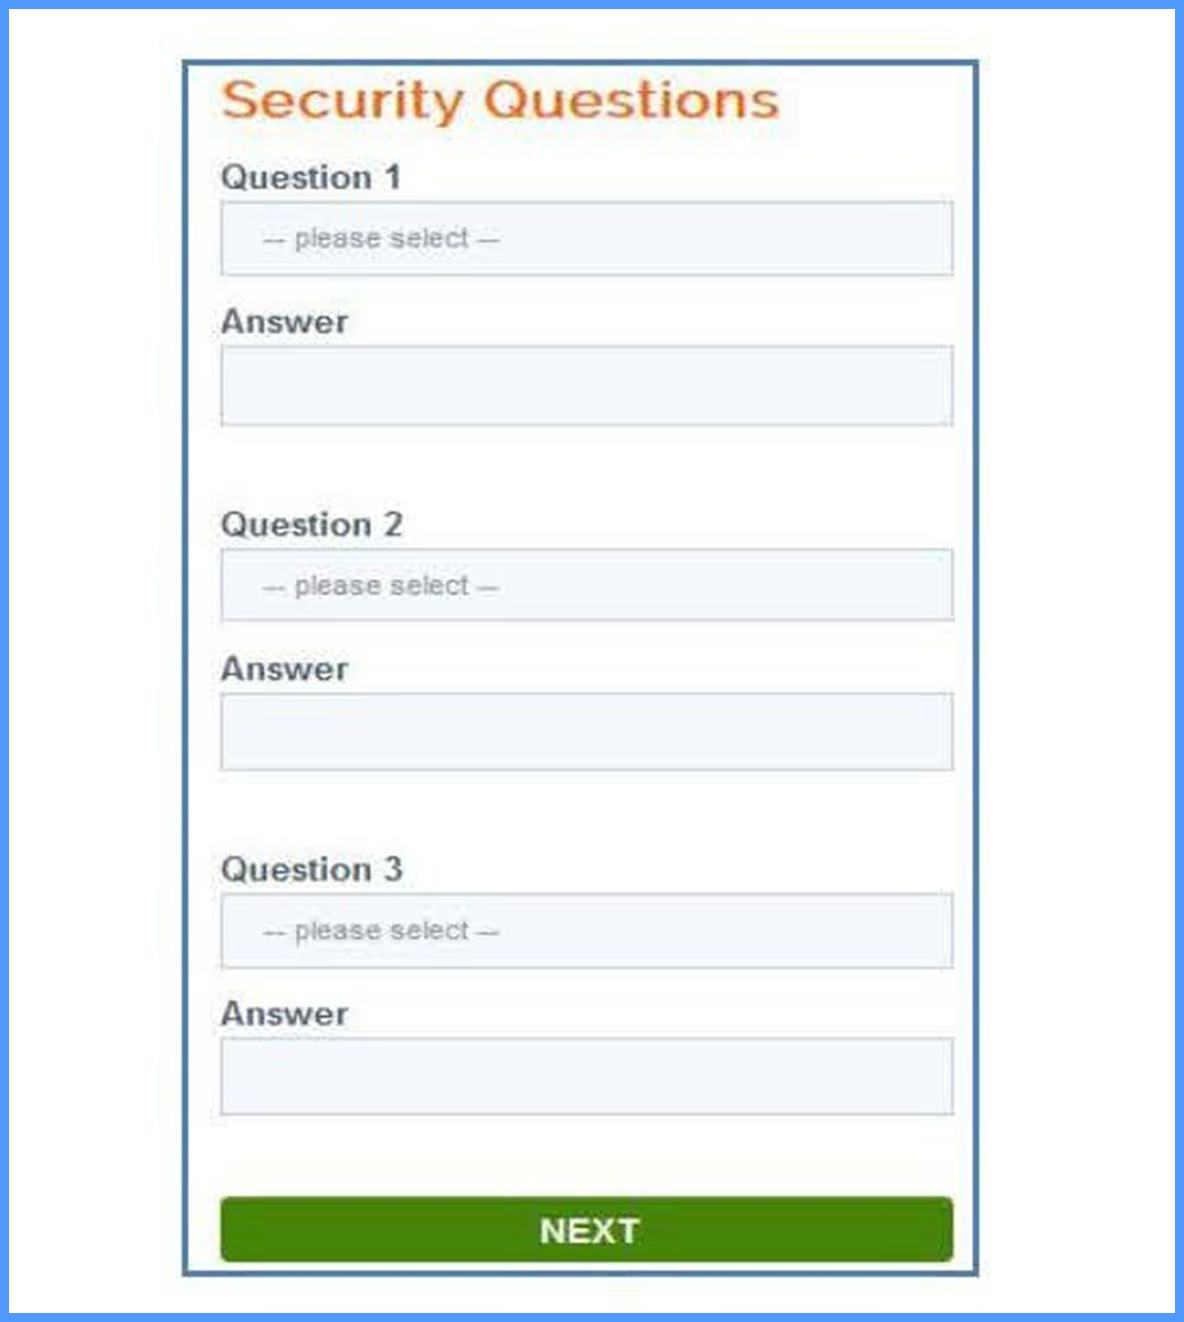 Security questions page